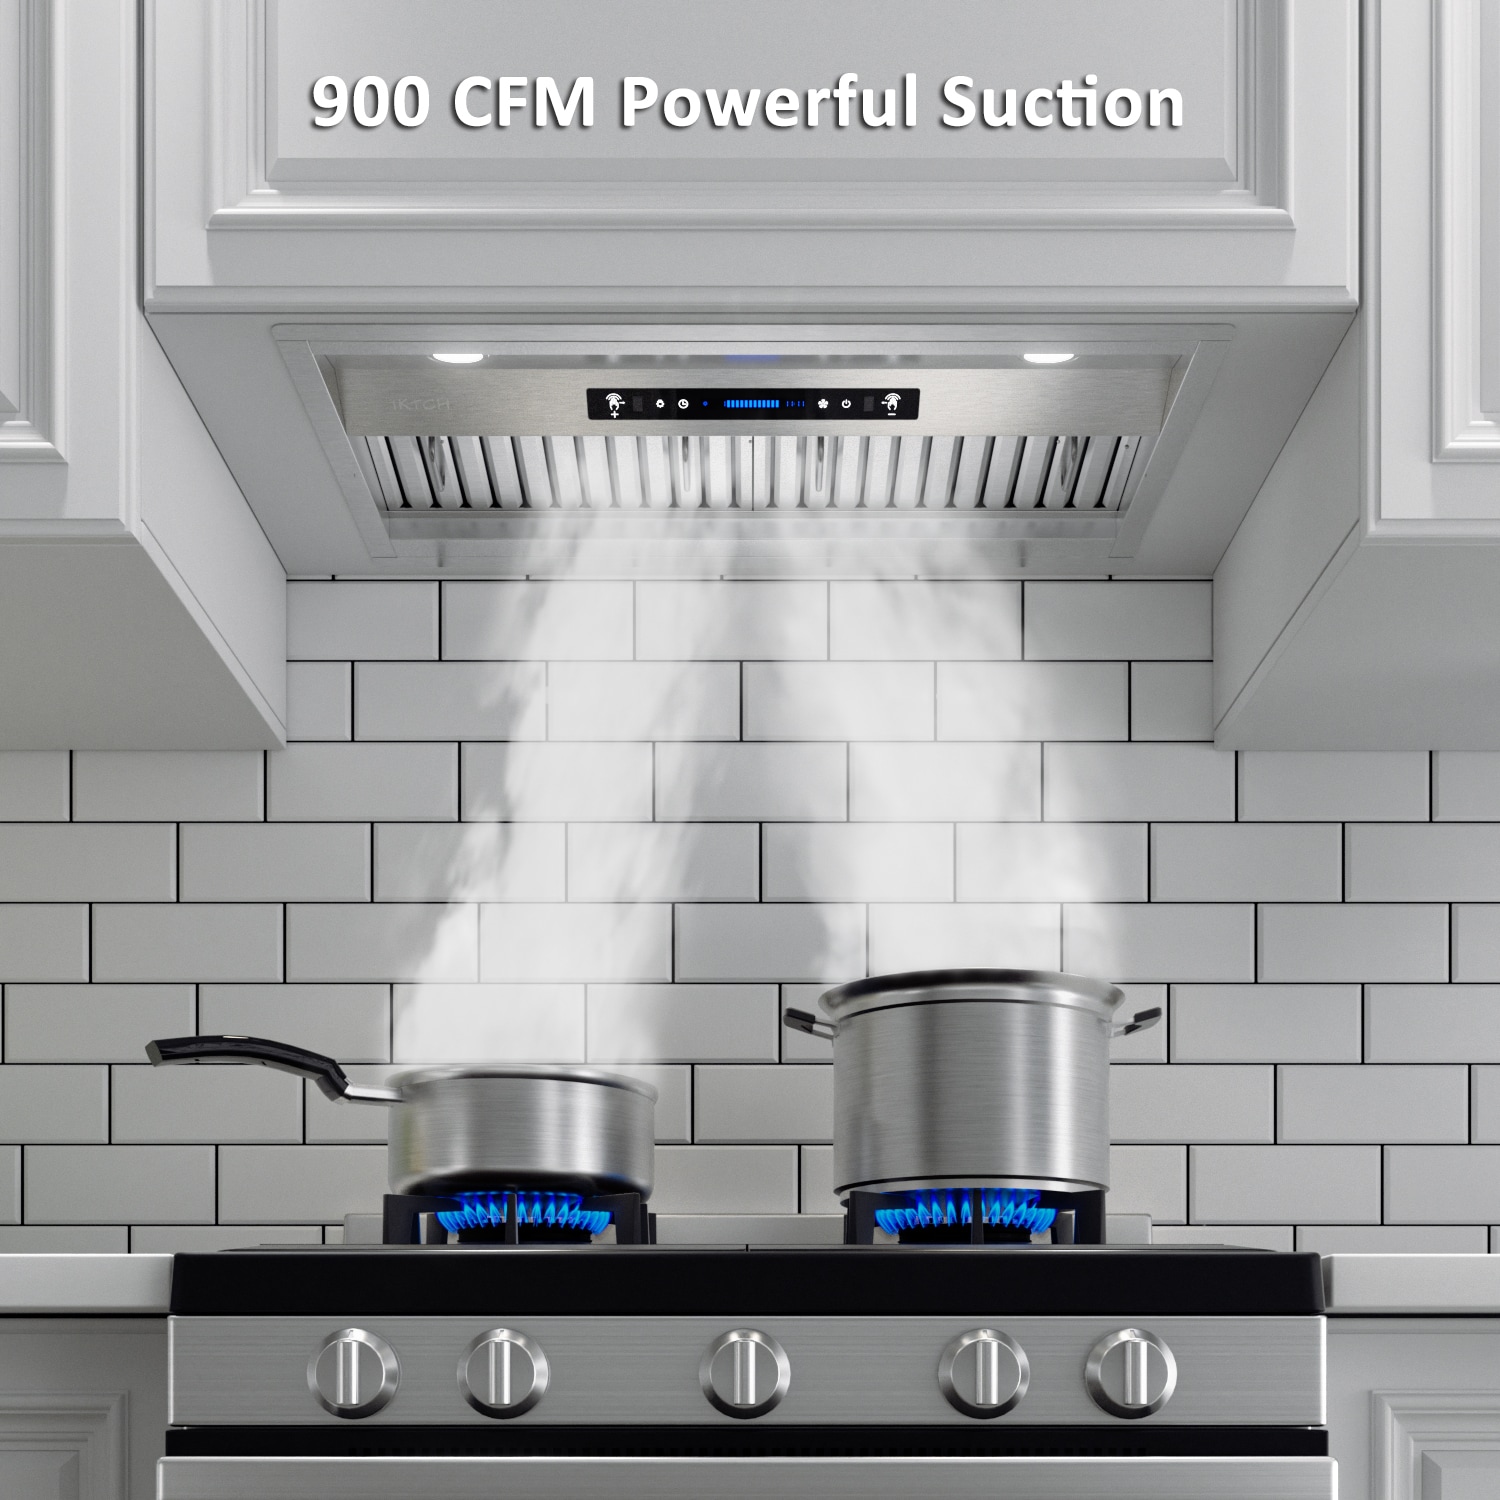 Range hood 30 inch Under Cabinet Range Hood with Ducted/Ductless